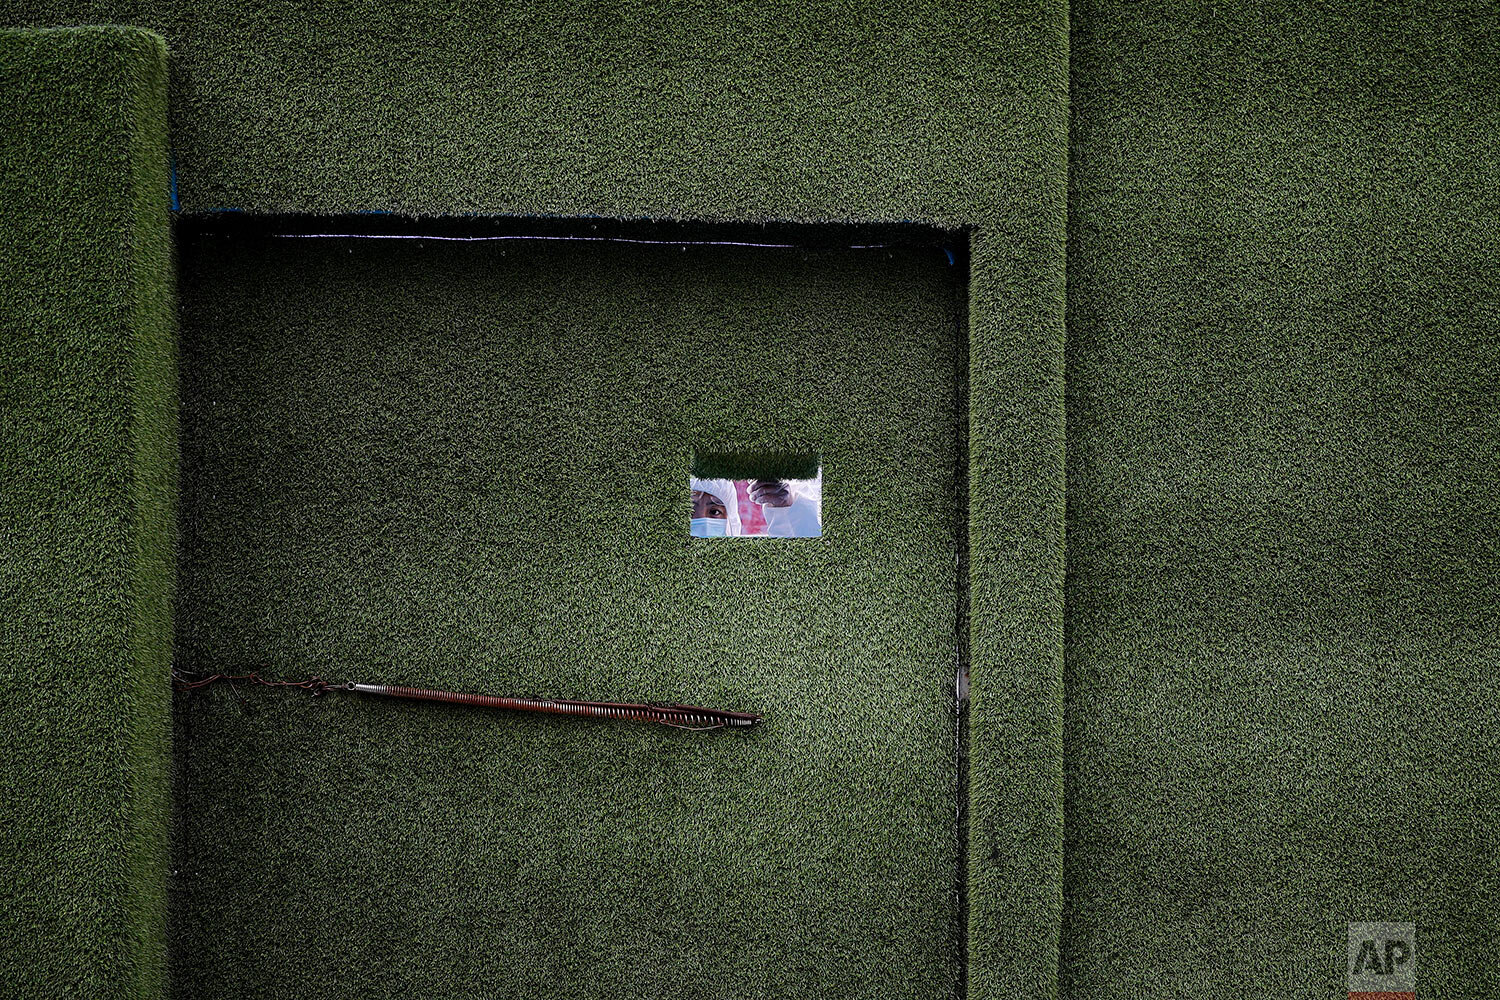  A security guard wearing protective gear peeks out from an entrance gate of a construction site at the Central Business District following the coronavirus outbreak in Beijing, Monday, March 2, 2020. (AP Photo/Andy Wong) 